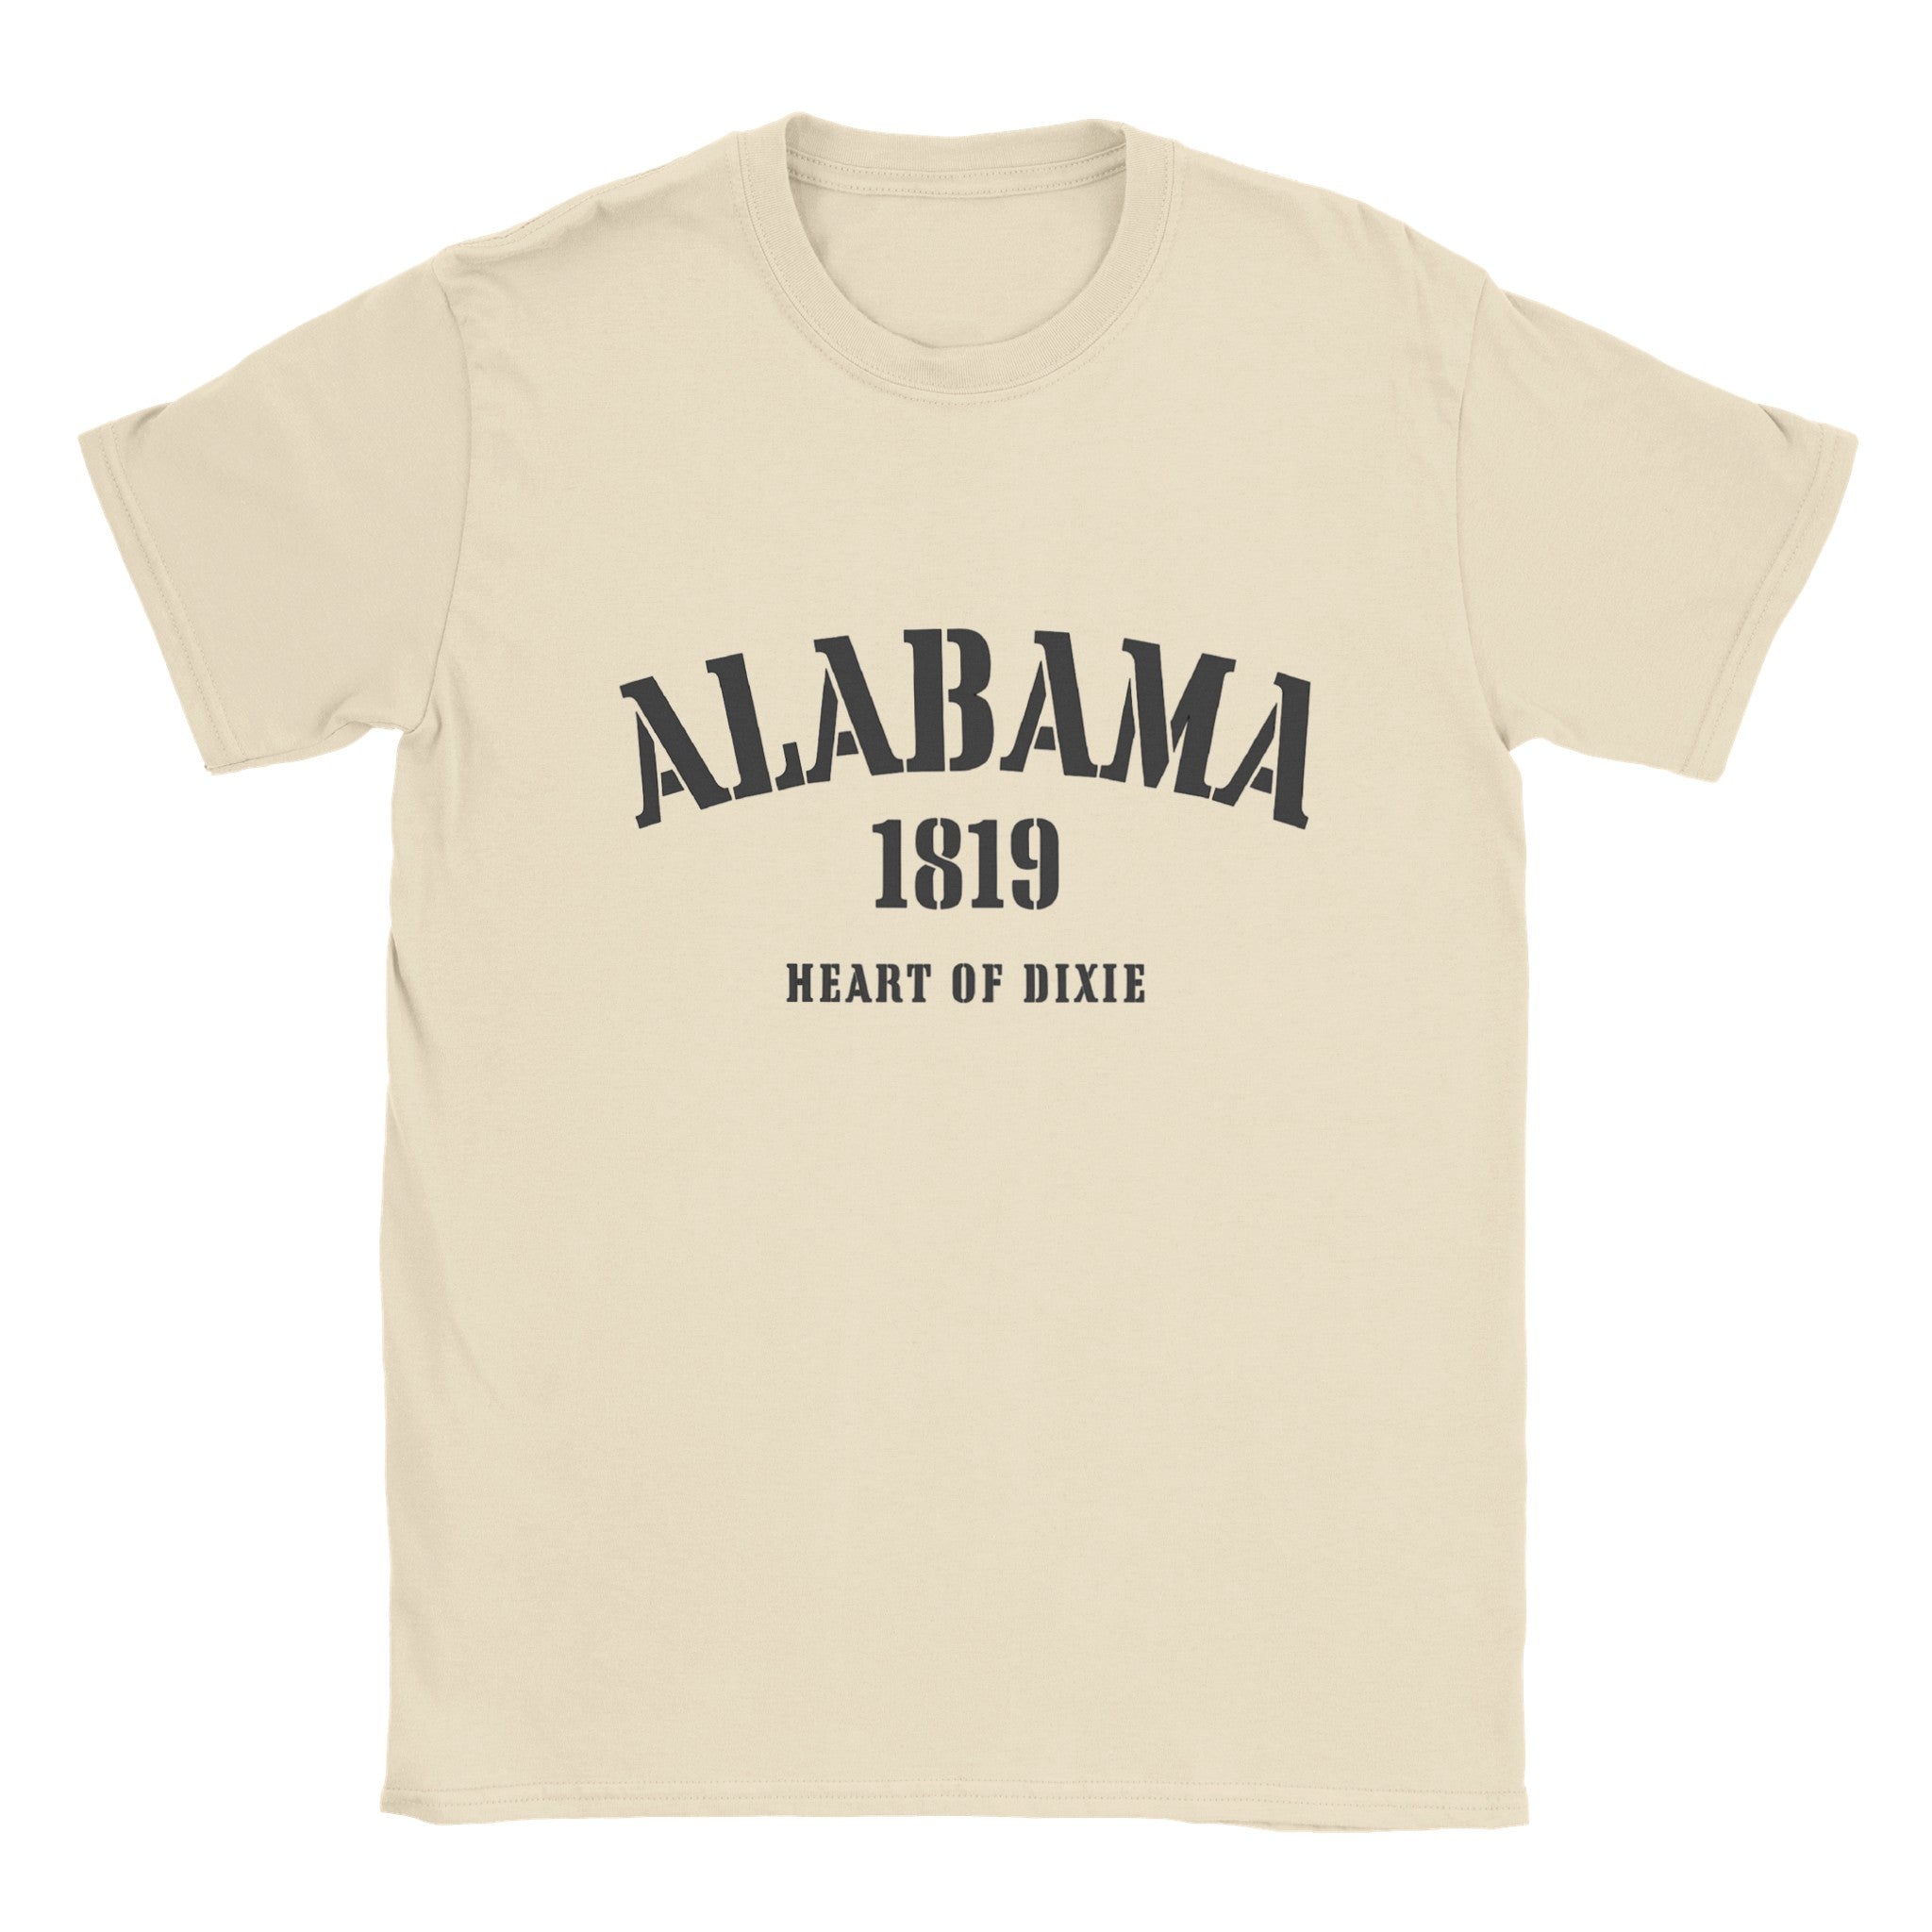 Alabama- Classic Unisex Crewneck T-shirt - Creations by Chris and Carlos